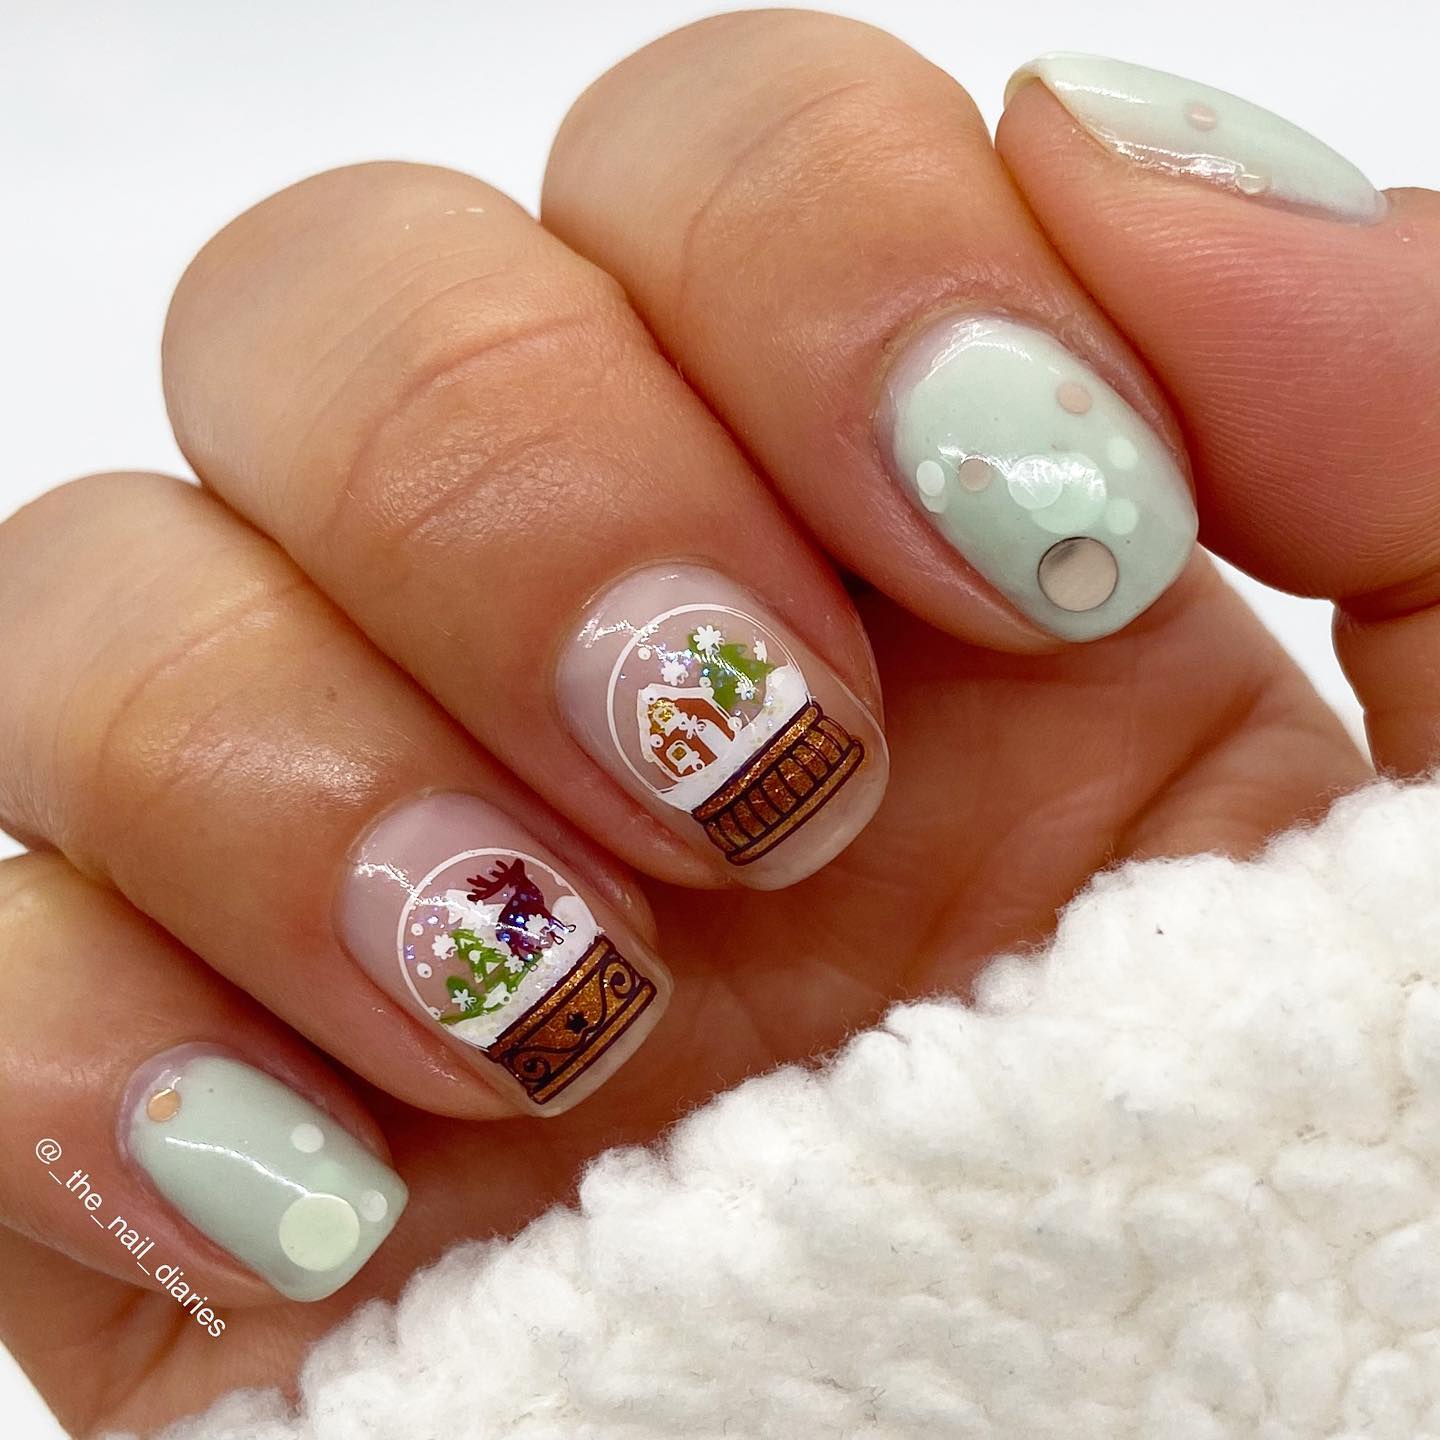 Snowglobes are one of the cutest things as for many people. If you think so, they are perfect for your winter inspired nails.